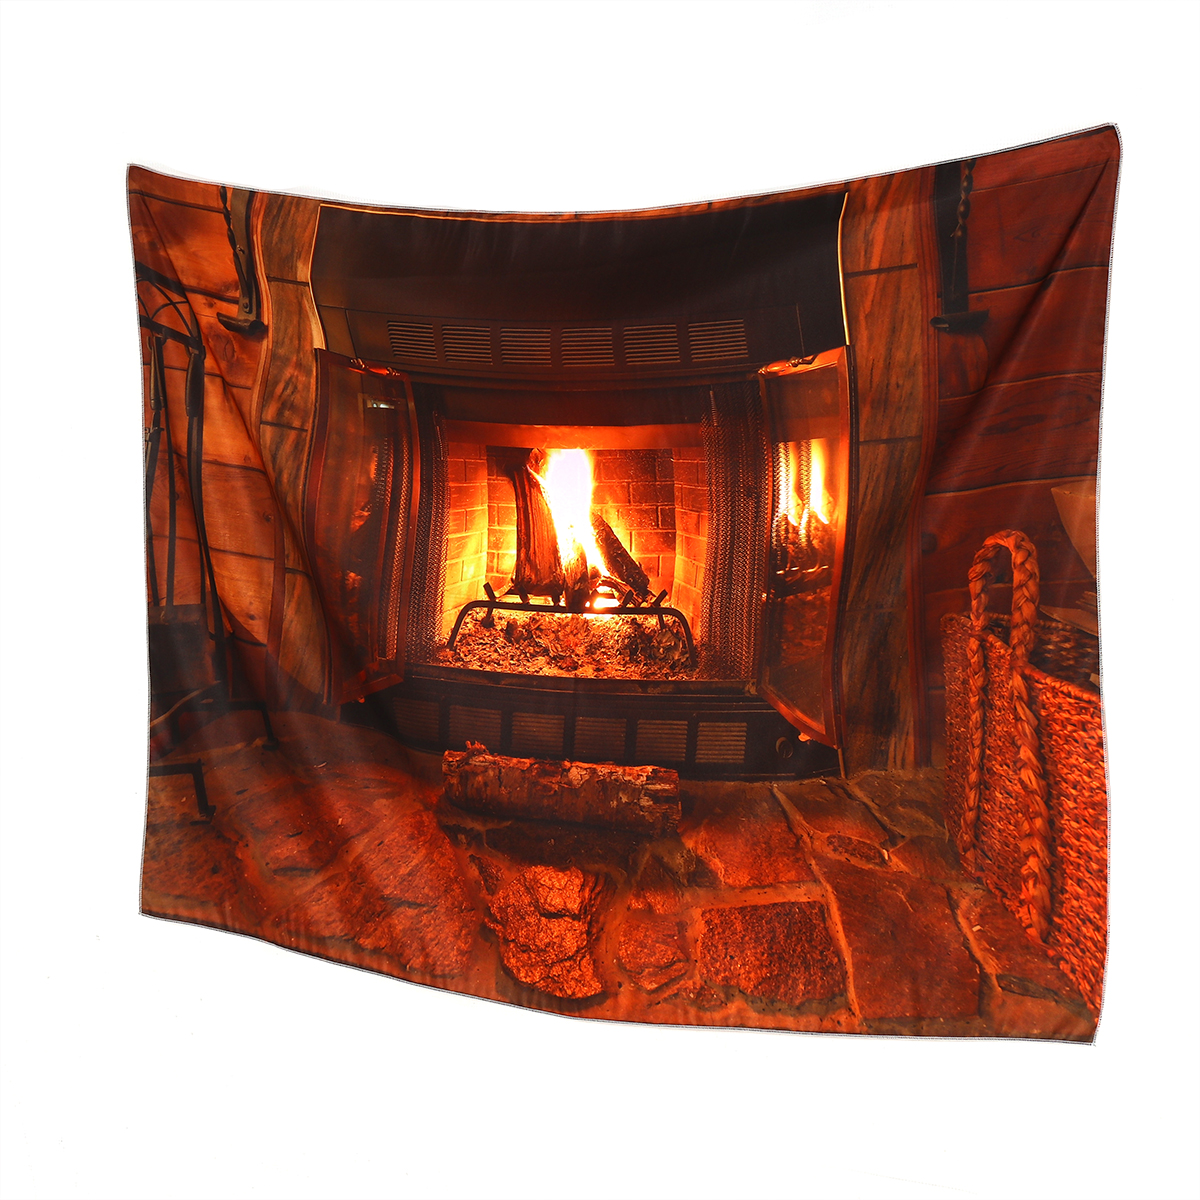 Find Polyester Wall Hanging Tapestry Art Home Decor Fireplace Pattern Blankets For Home Bedroom Porch Hangings for Sale on Gipsybee.com with cryptocurrencies